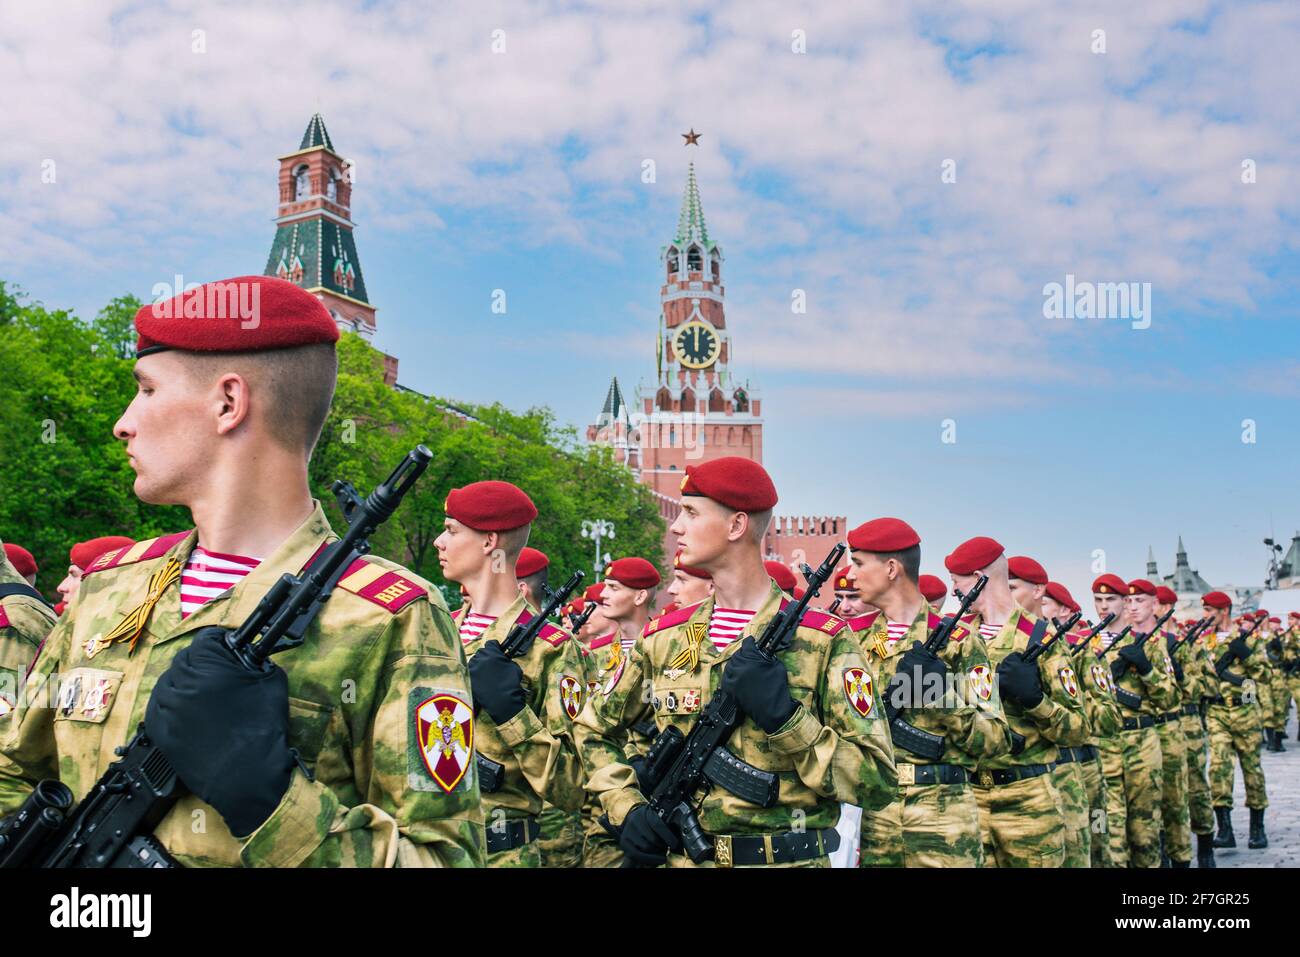 The Russian army in red berets and green uniforms. Military with weapons in hands: Moscow, Russia, 09 may 2019. Stock Photo